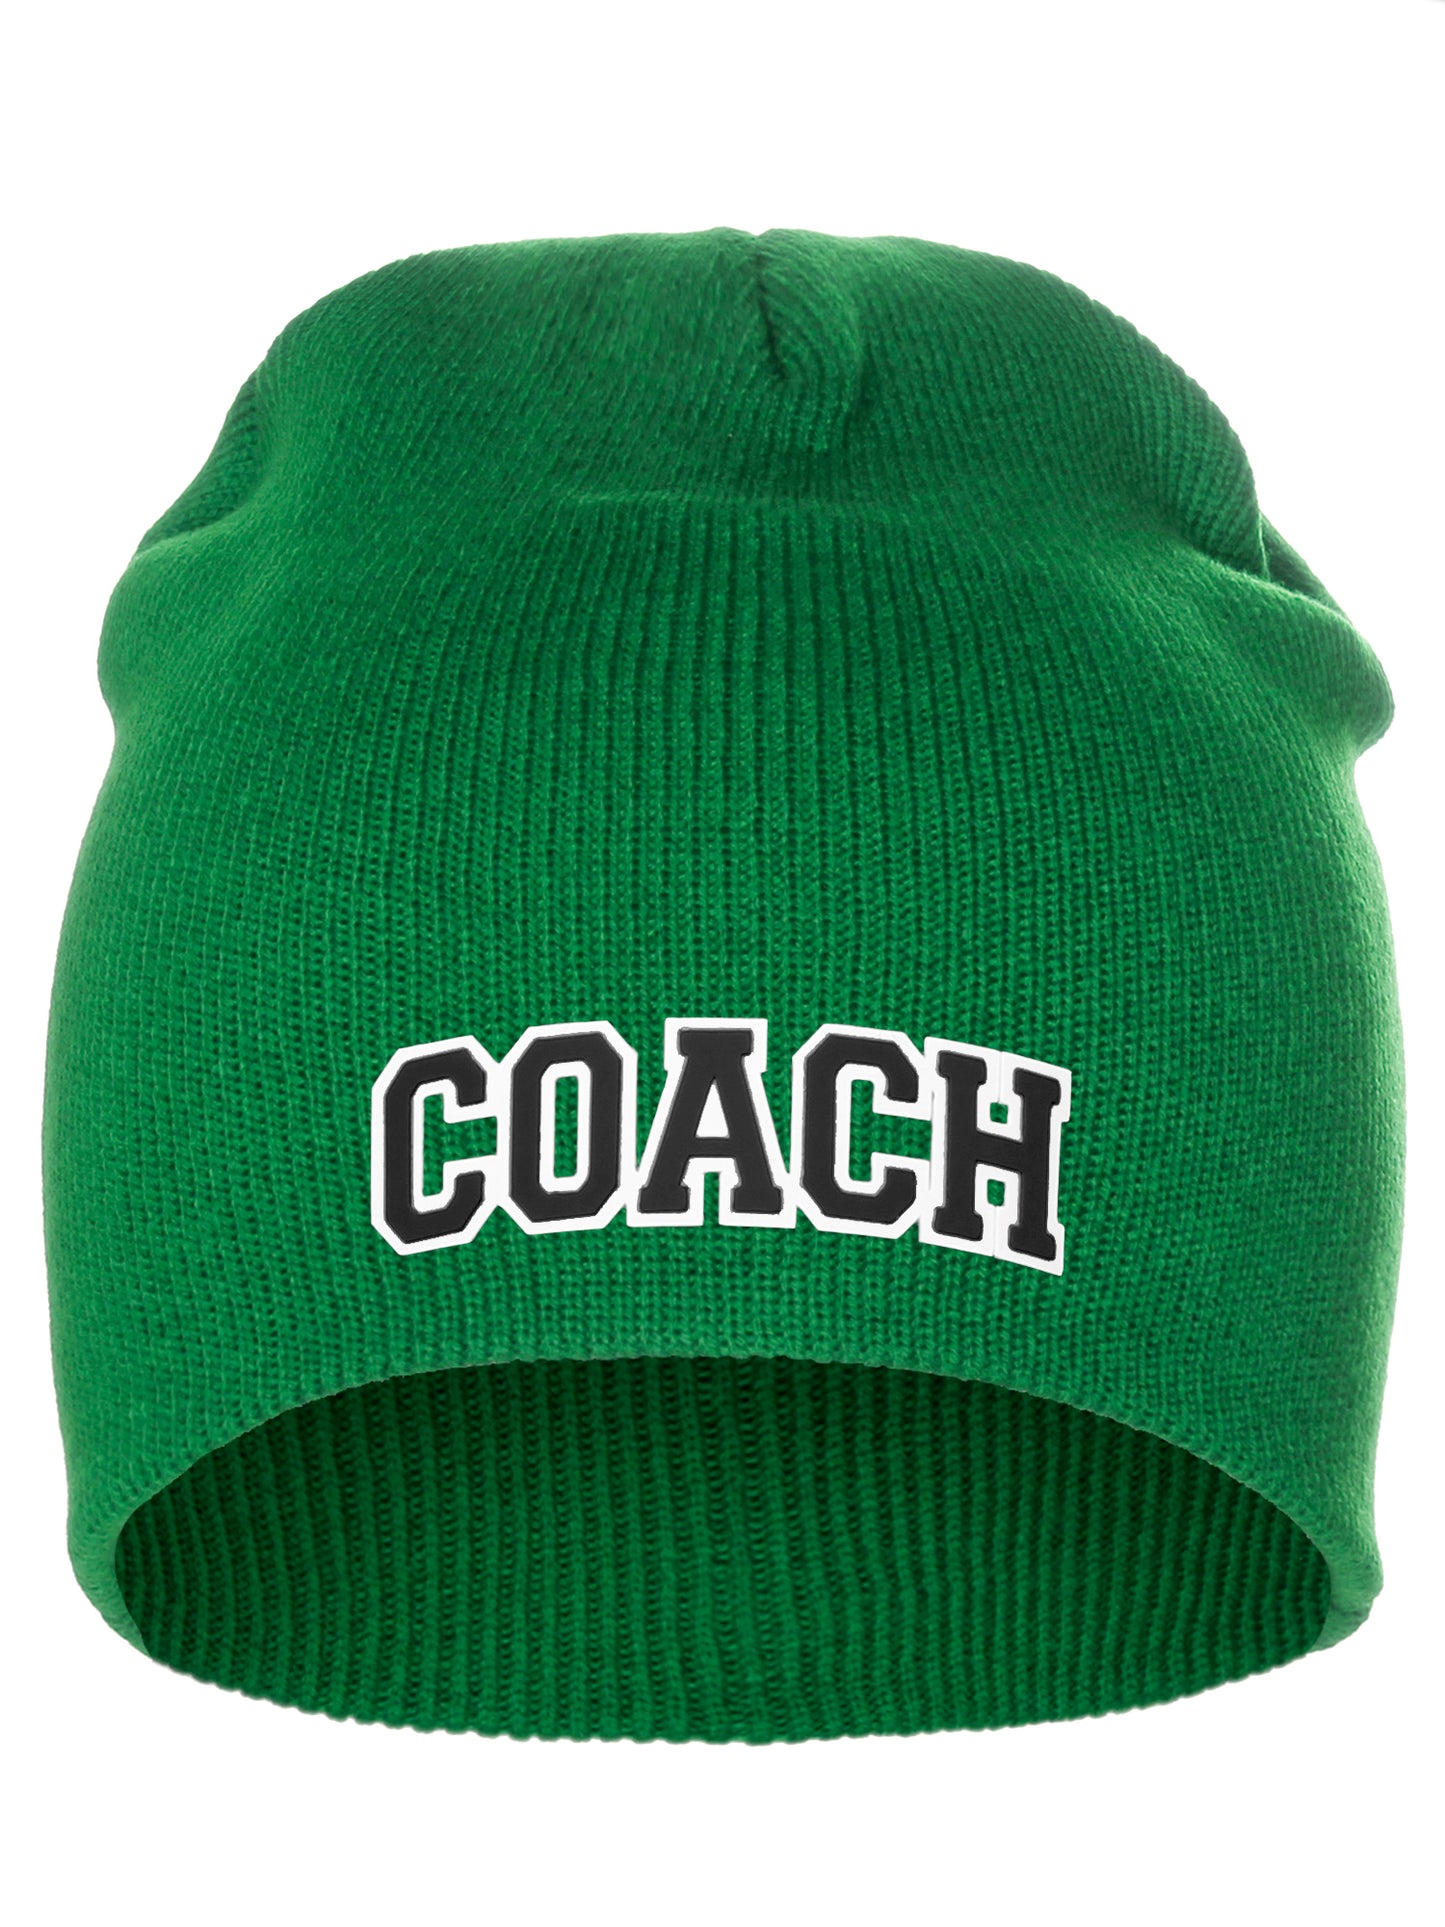 Coach Arch Letters Winter Knit Cuffless Beanie 3D Raised Layers